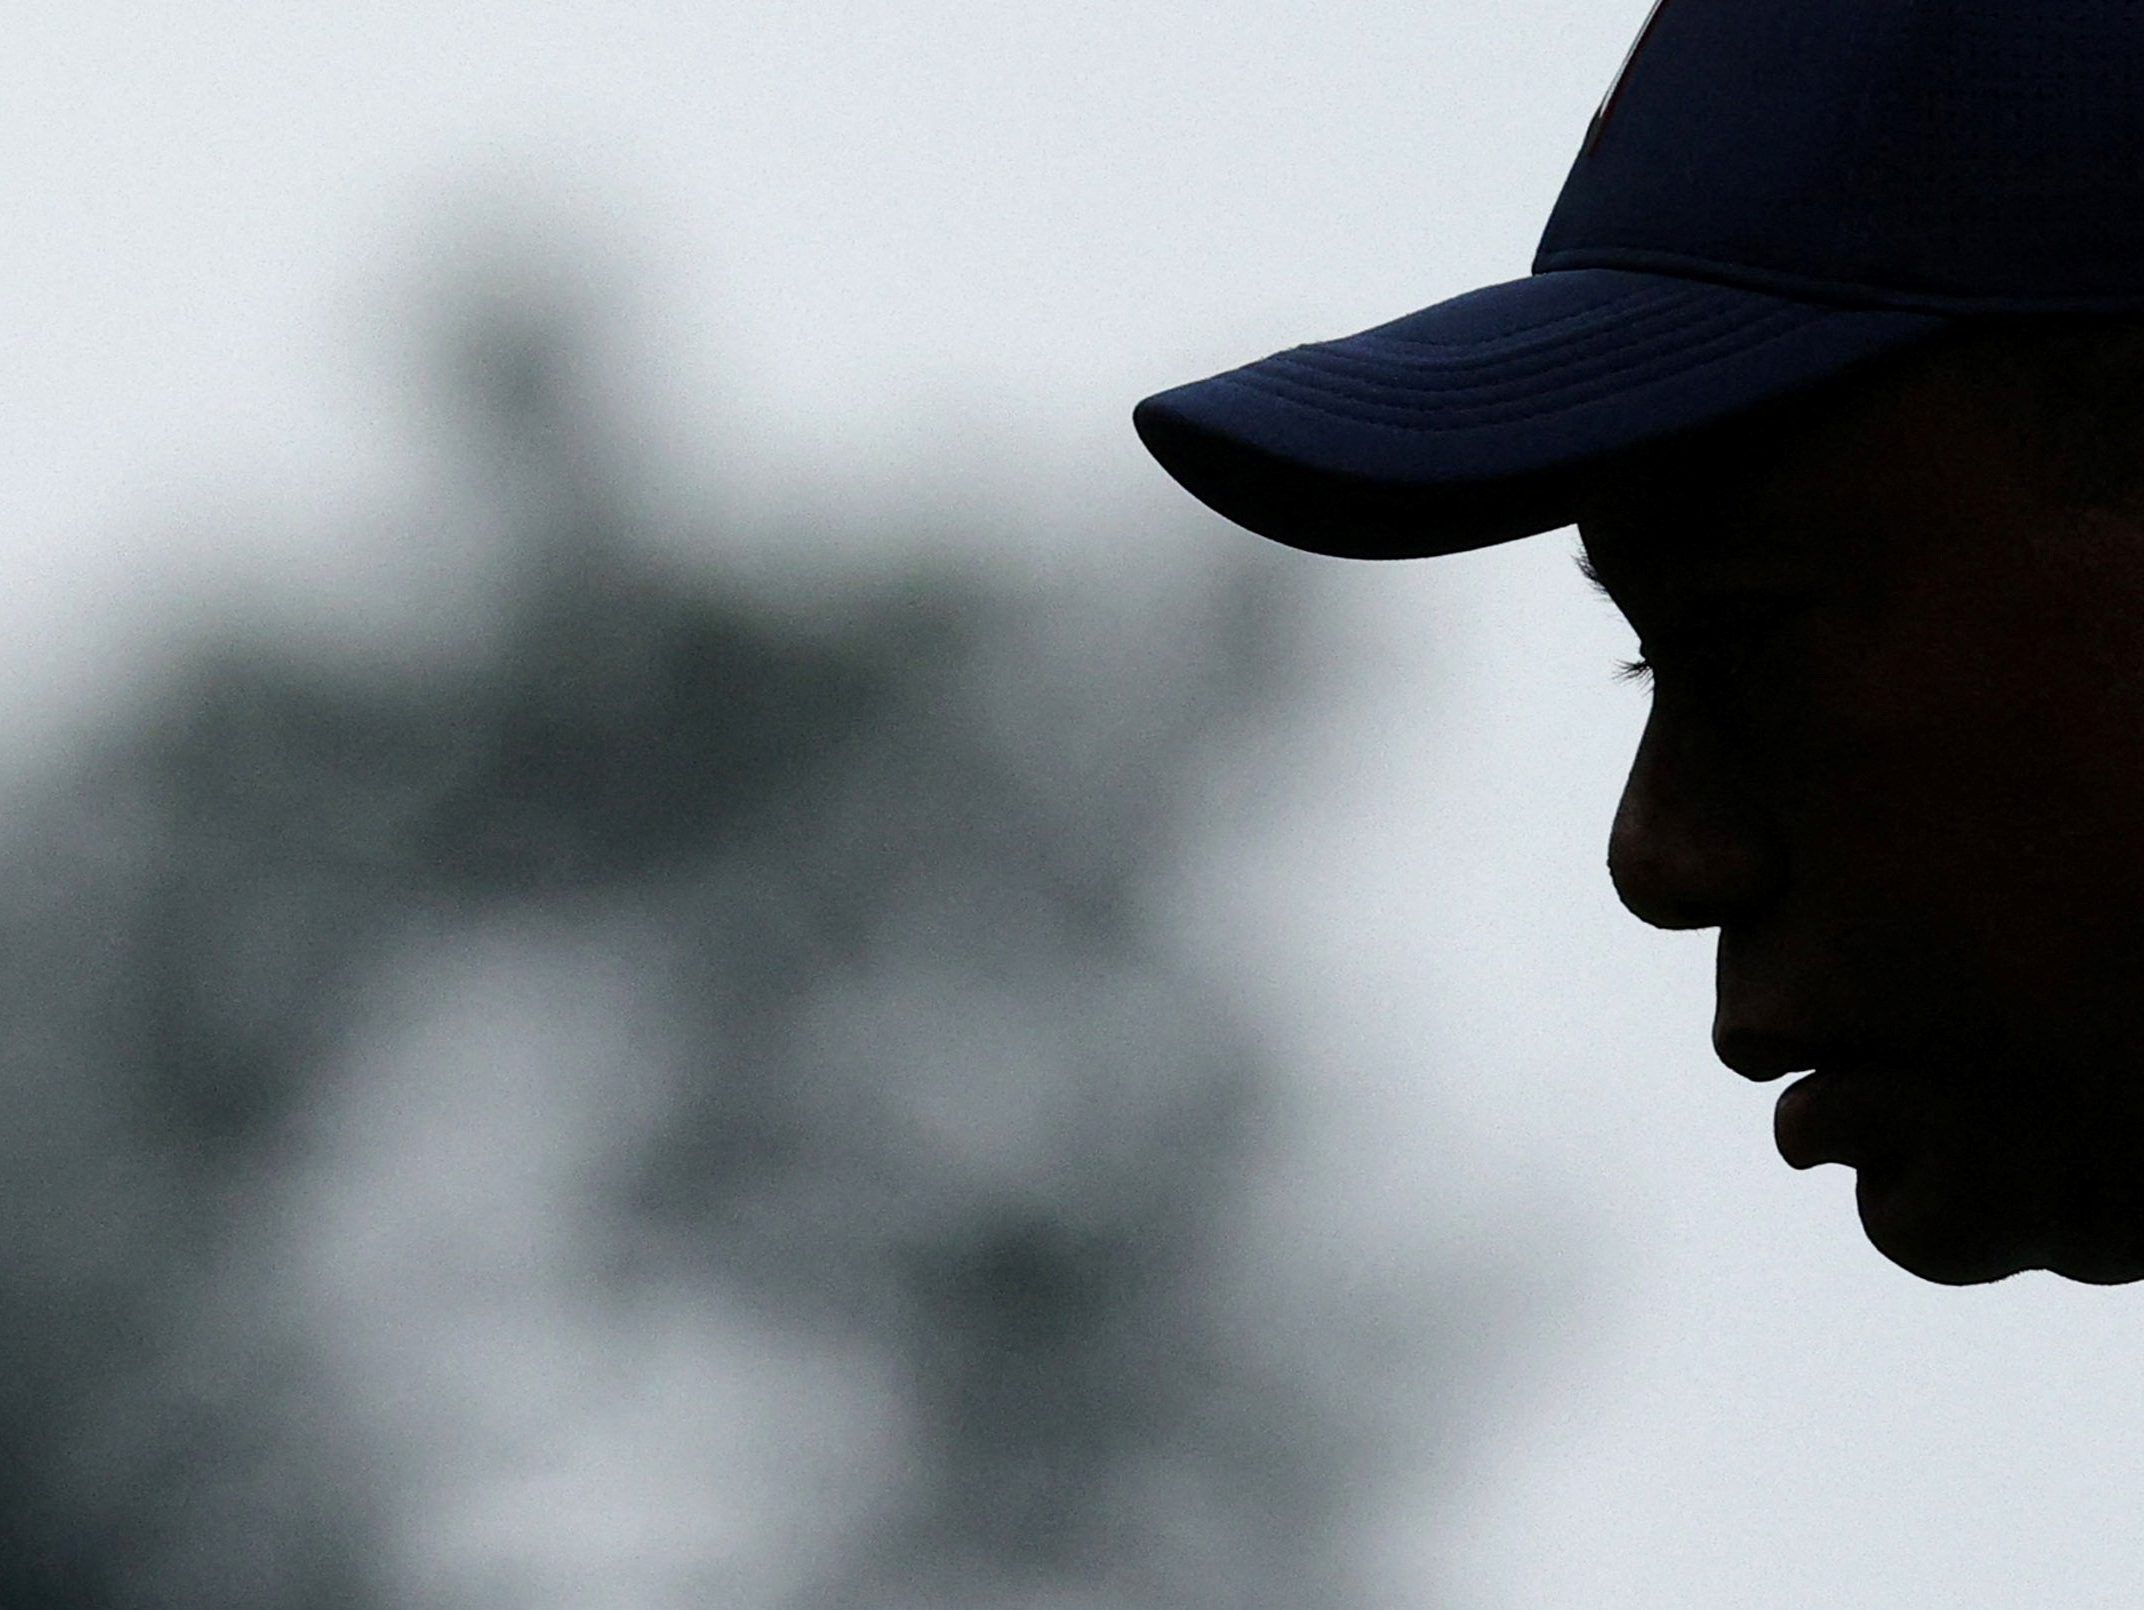 Tiger Woods 2023 Masters odds, predictions: Bold Tiger Woods